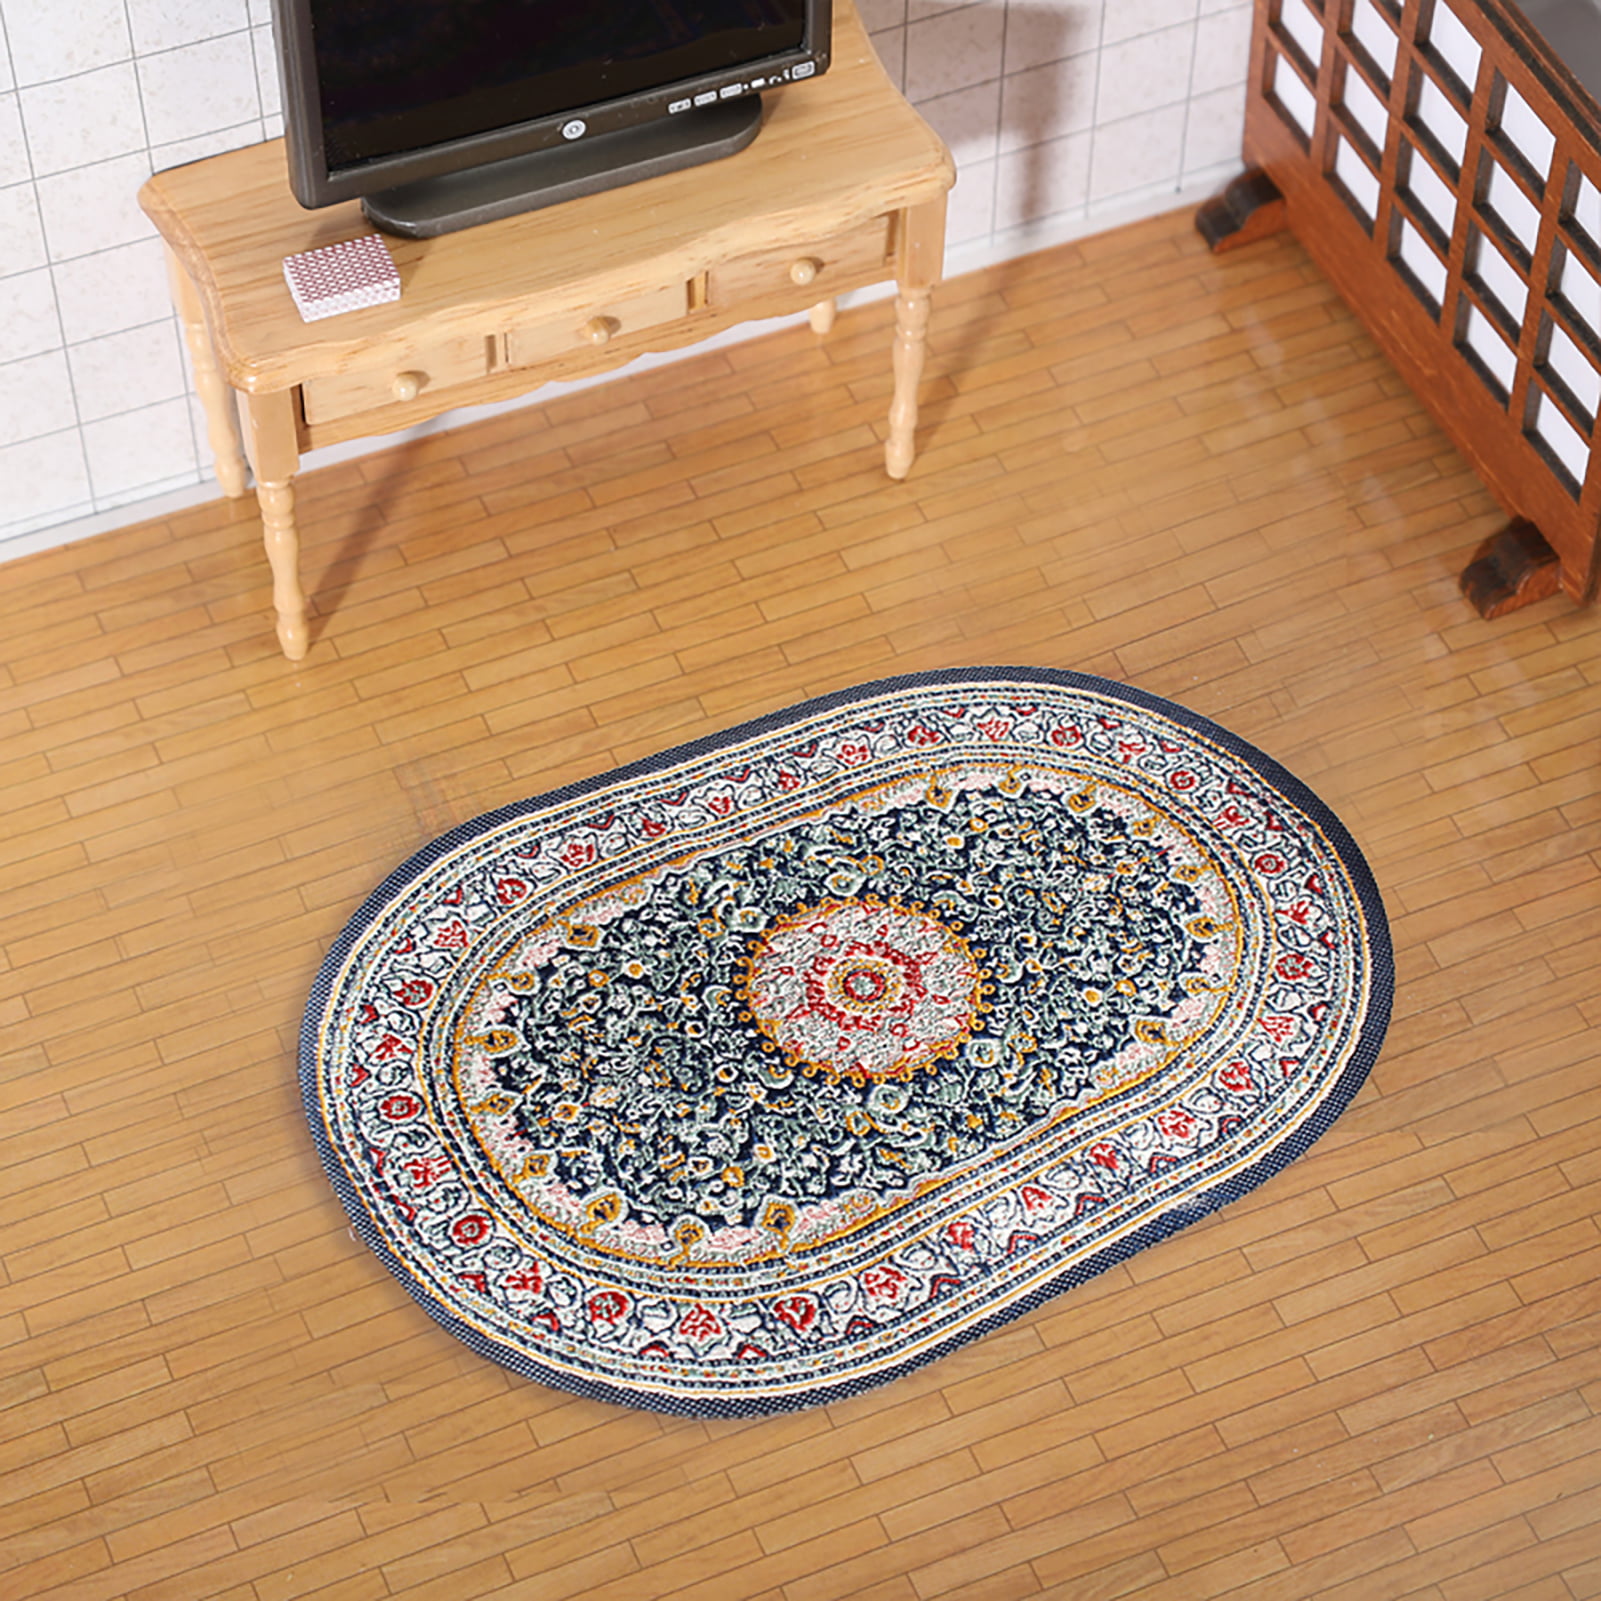 1:12th Oval Shaped Rug Carpet Dollhouse Floor Coverings Miniatures Accessory